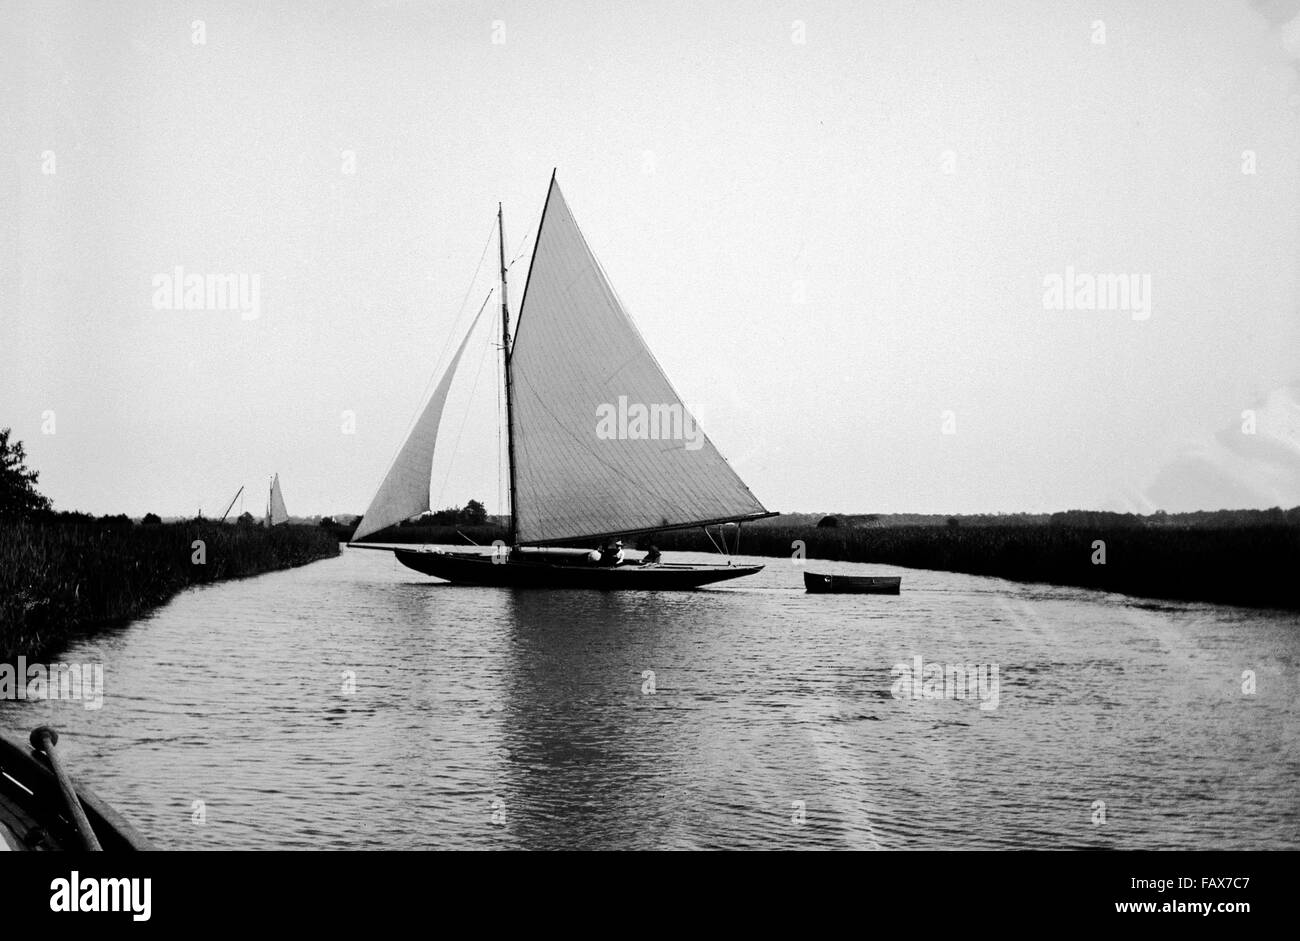 AJAXNETPHOTO - EARLY 1900S (APPROX). NORFOLK BROADS, ENGLAND.  - EDWARDIAN YACHTING - A GAFF RIGGED CUTTER UNDER WAY IN A LIGHT BREEZE. PHOTO:AJAX VINTAGE PICTURE LIBRARY.  REF:AVL/YA/BROADS SAILING 2 Stock Photo